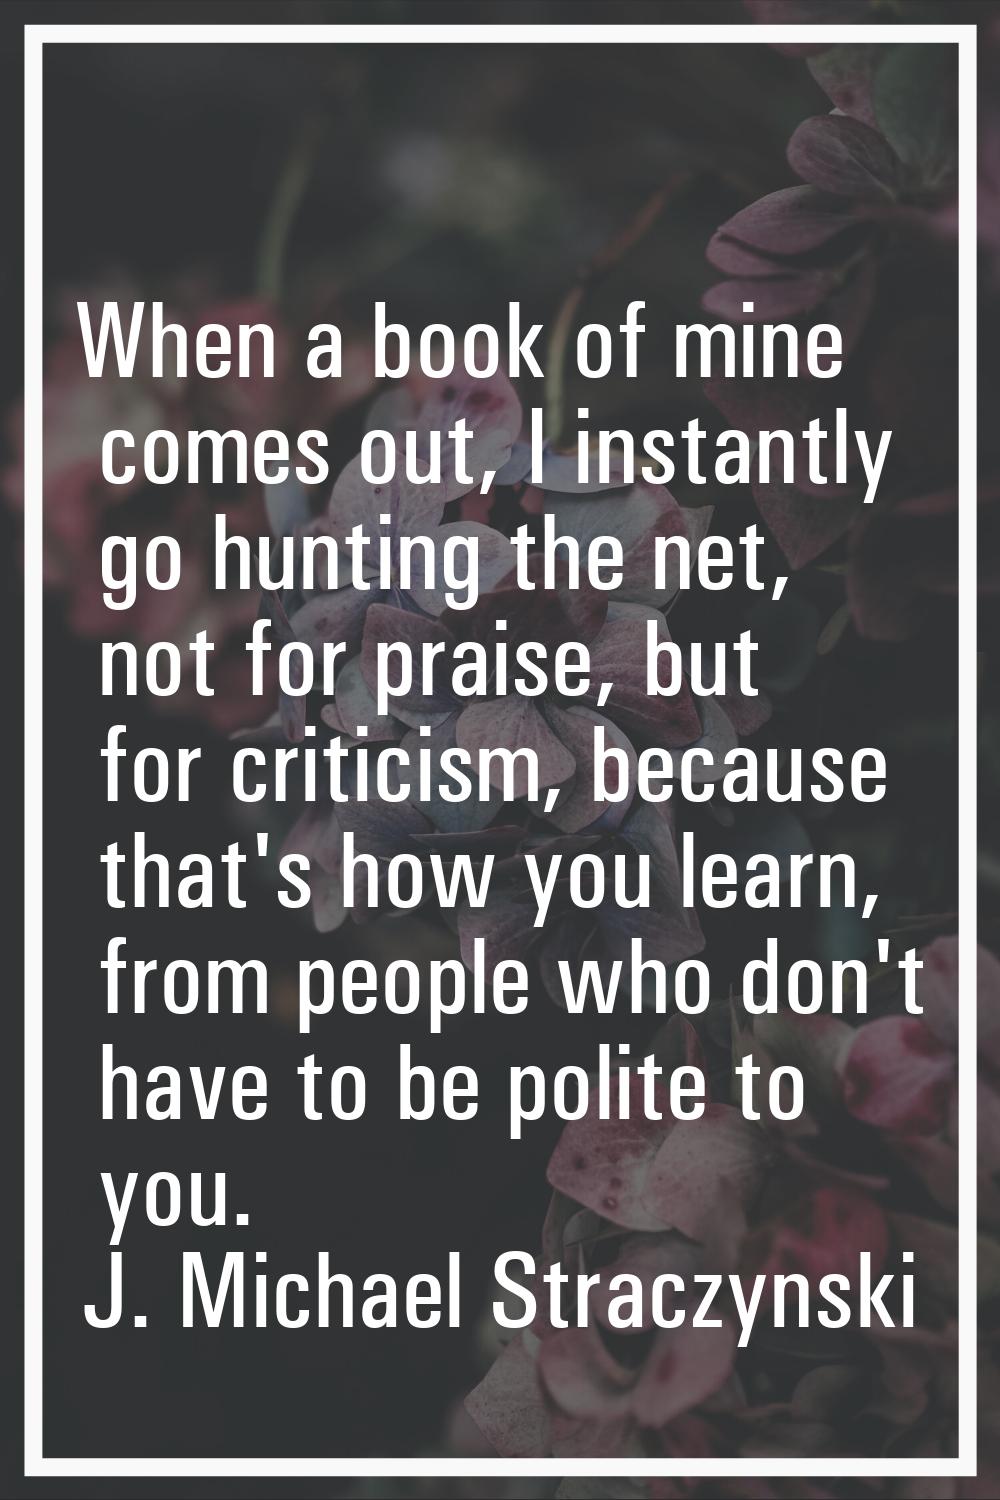 When a book of mine comes out, I instantly go hunting the net, not for praise, but for criticism, b